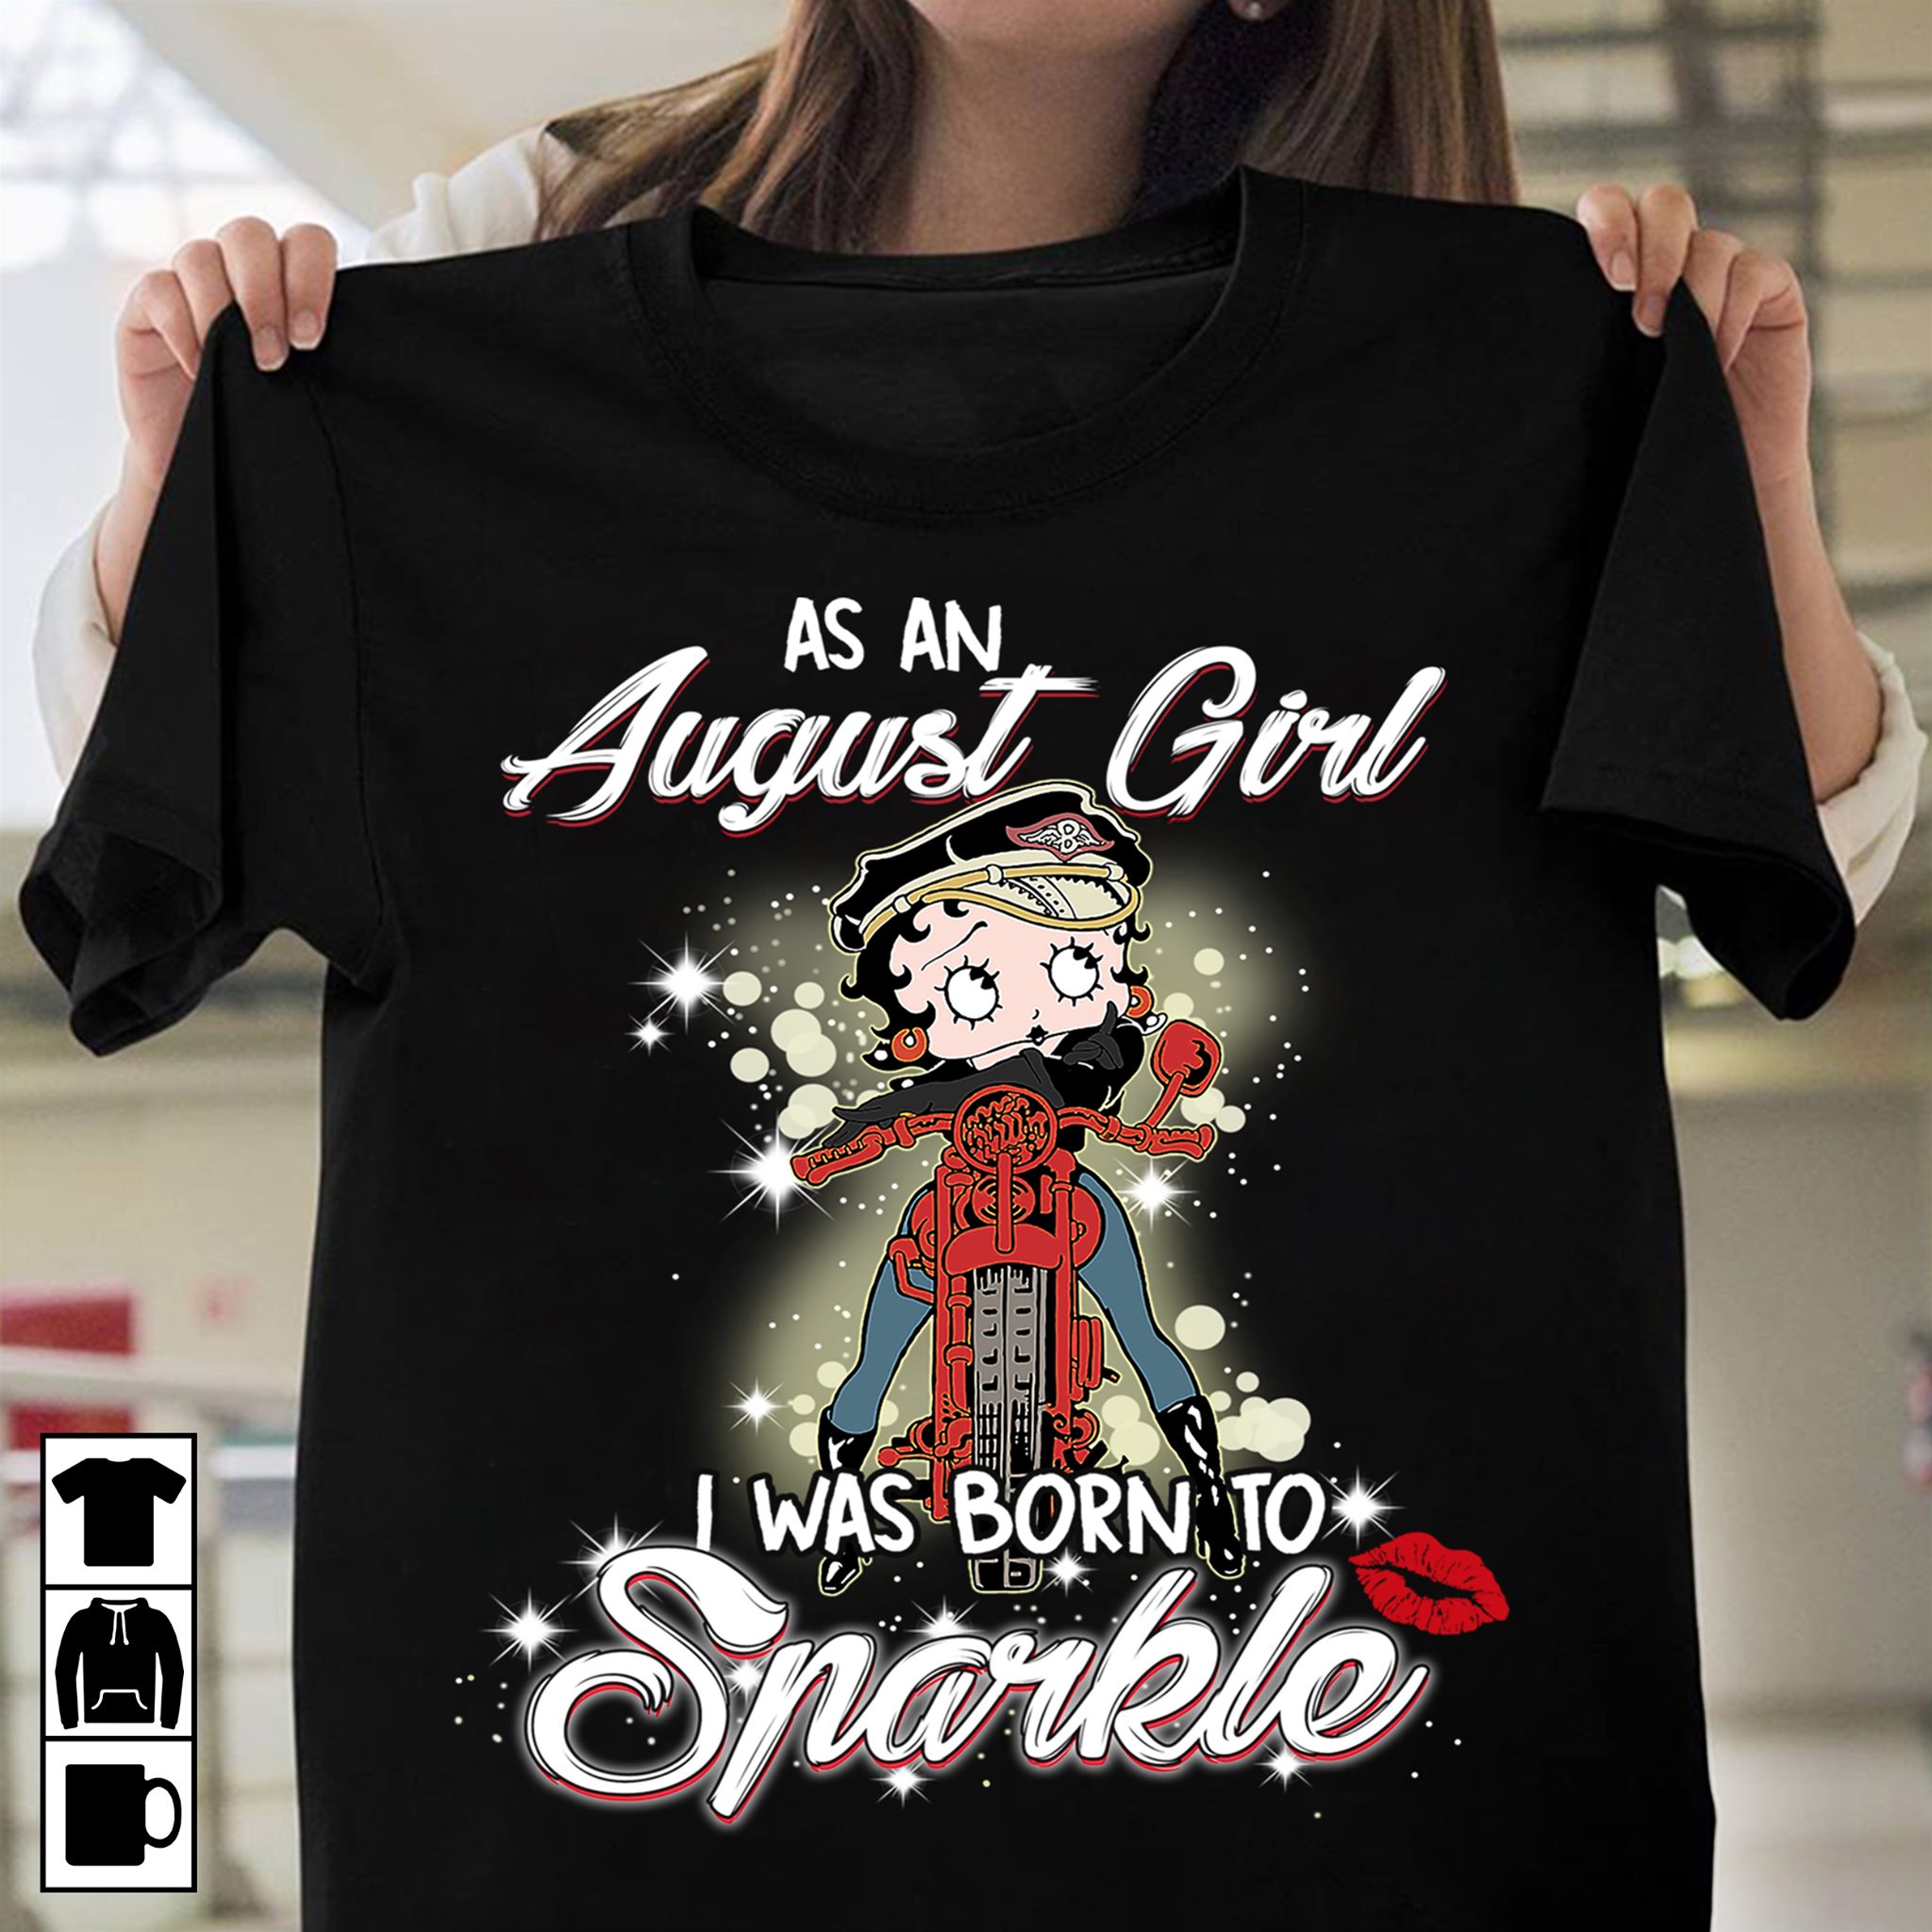 As an august girl I was born to sparkle - Girl and motorcycle